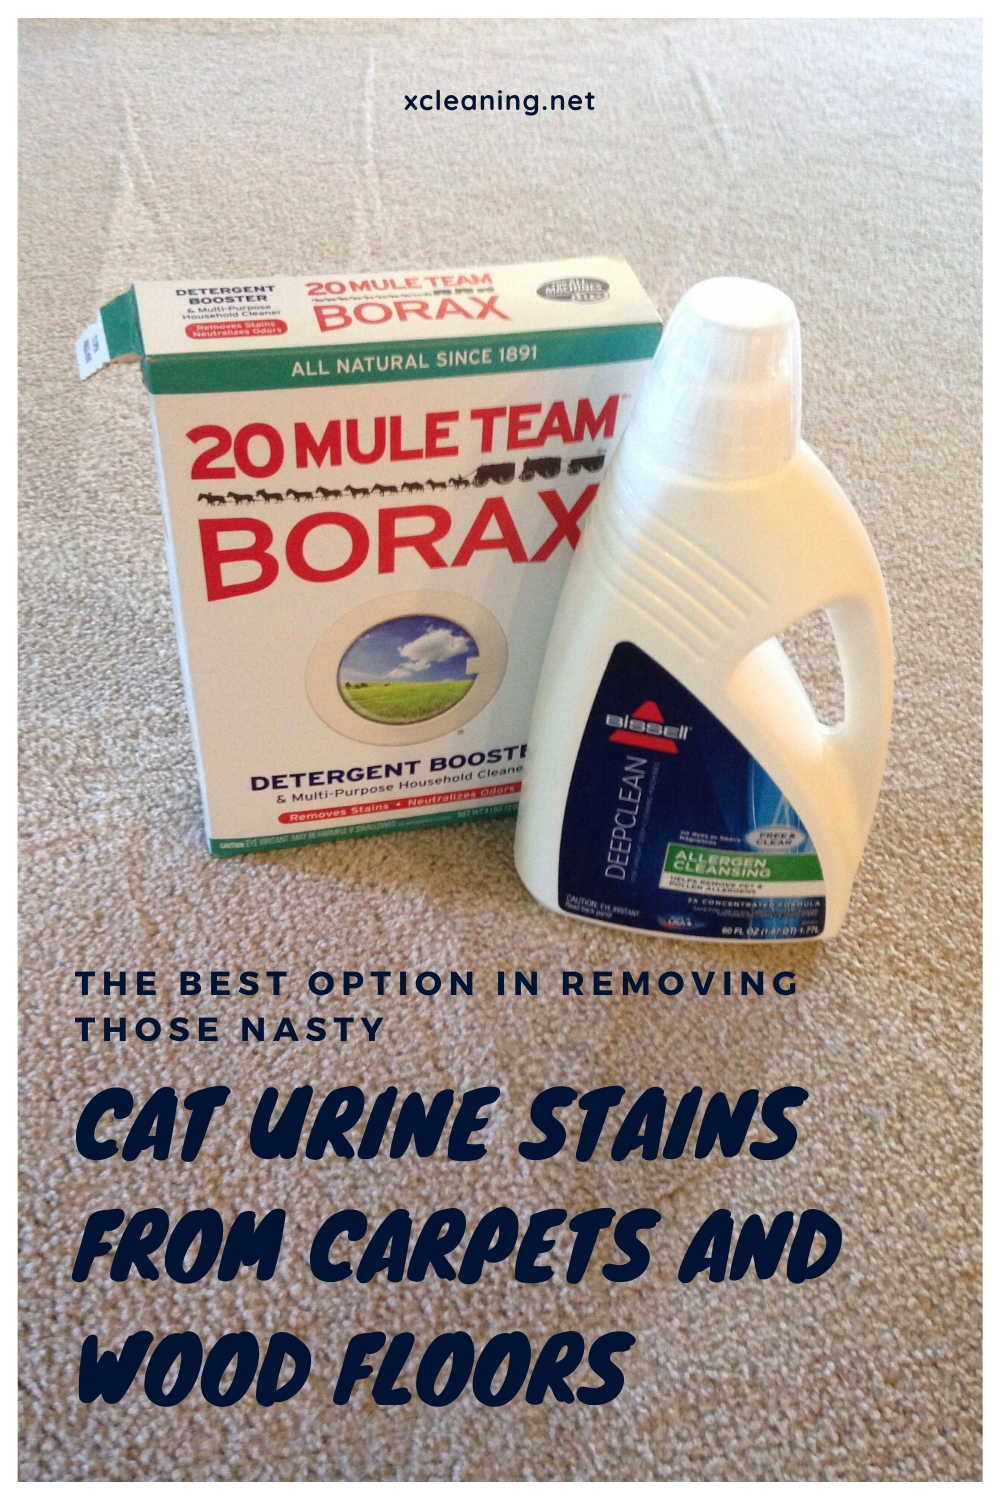 The Best Option In Removing Those Nasty Cat Urine Stains ...